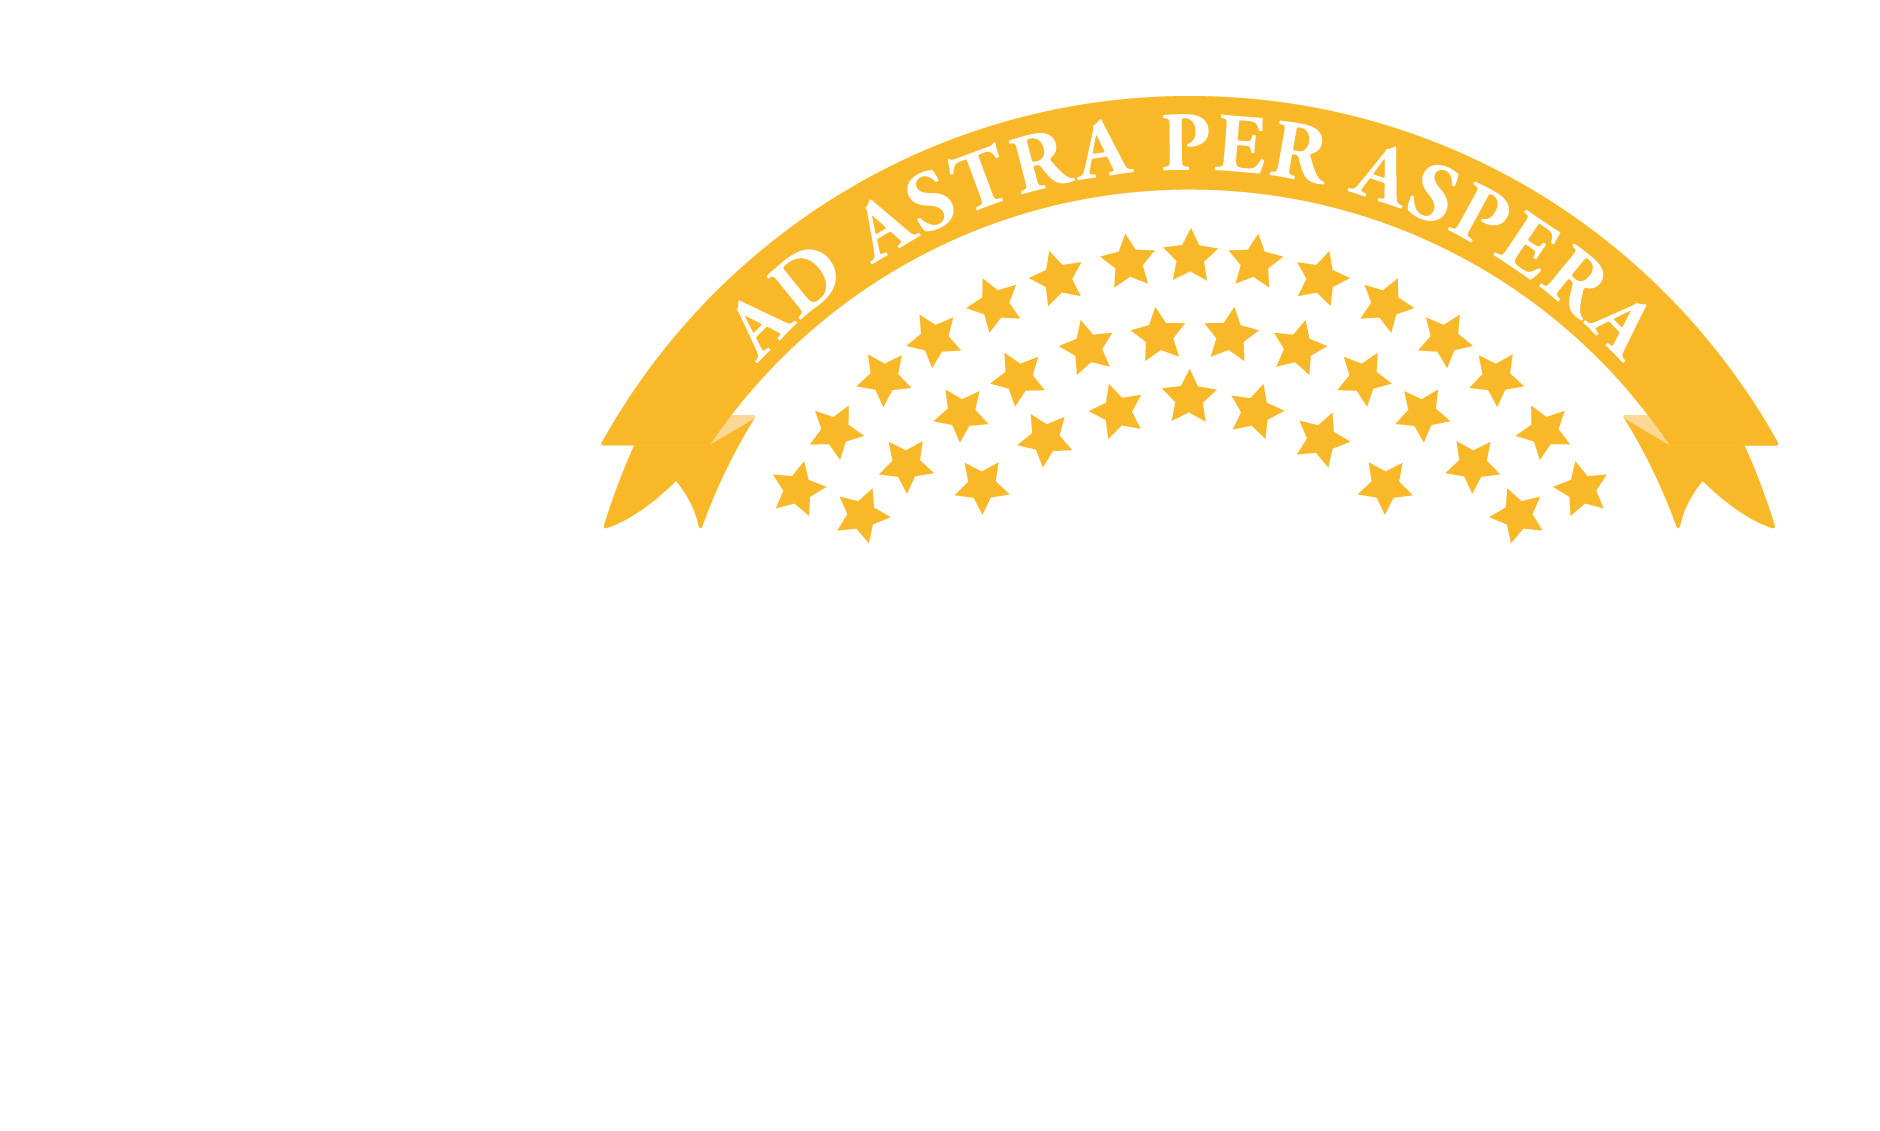 Is there a way to check my Kansas state refund status over the phone?
